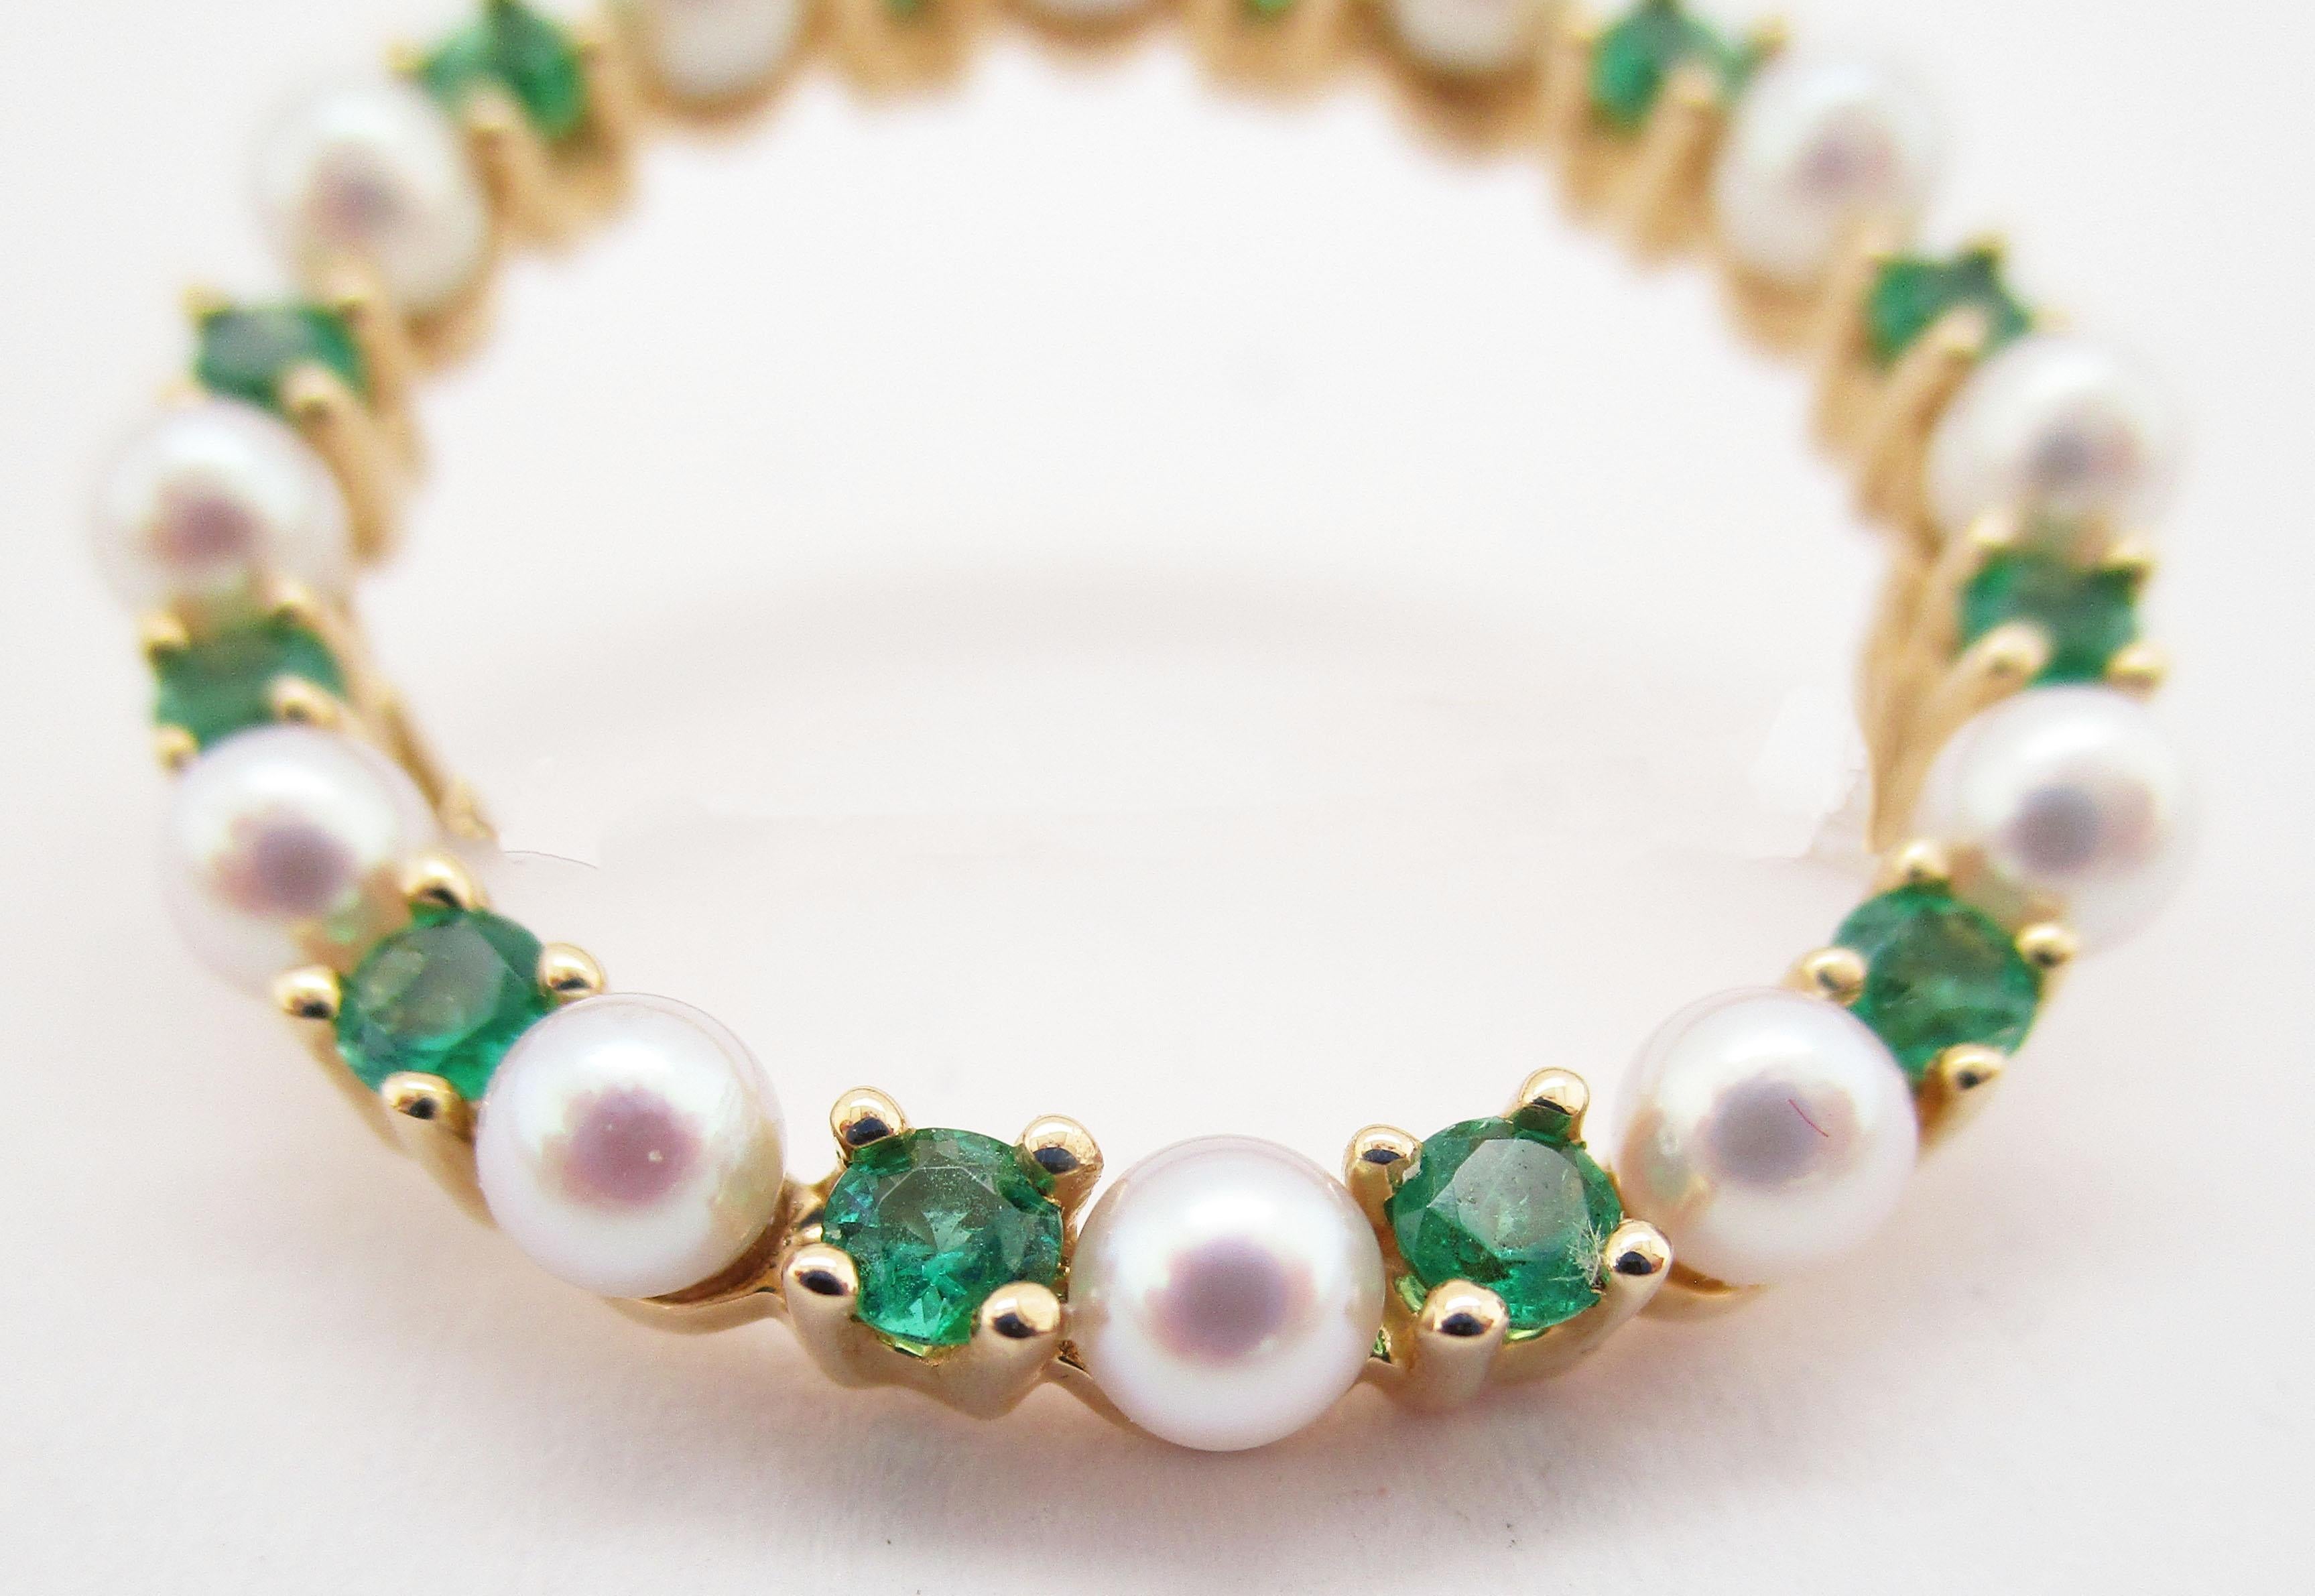 This is an absolutely beautiful mid-century circle pin with a gorgeous array of pearls and emeralds set into 14k yellow gold. The pearls are stunning-like shimmery silver round mirrors! The luster of the pearls is the perfect contrast for the